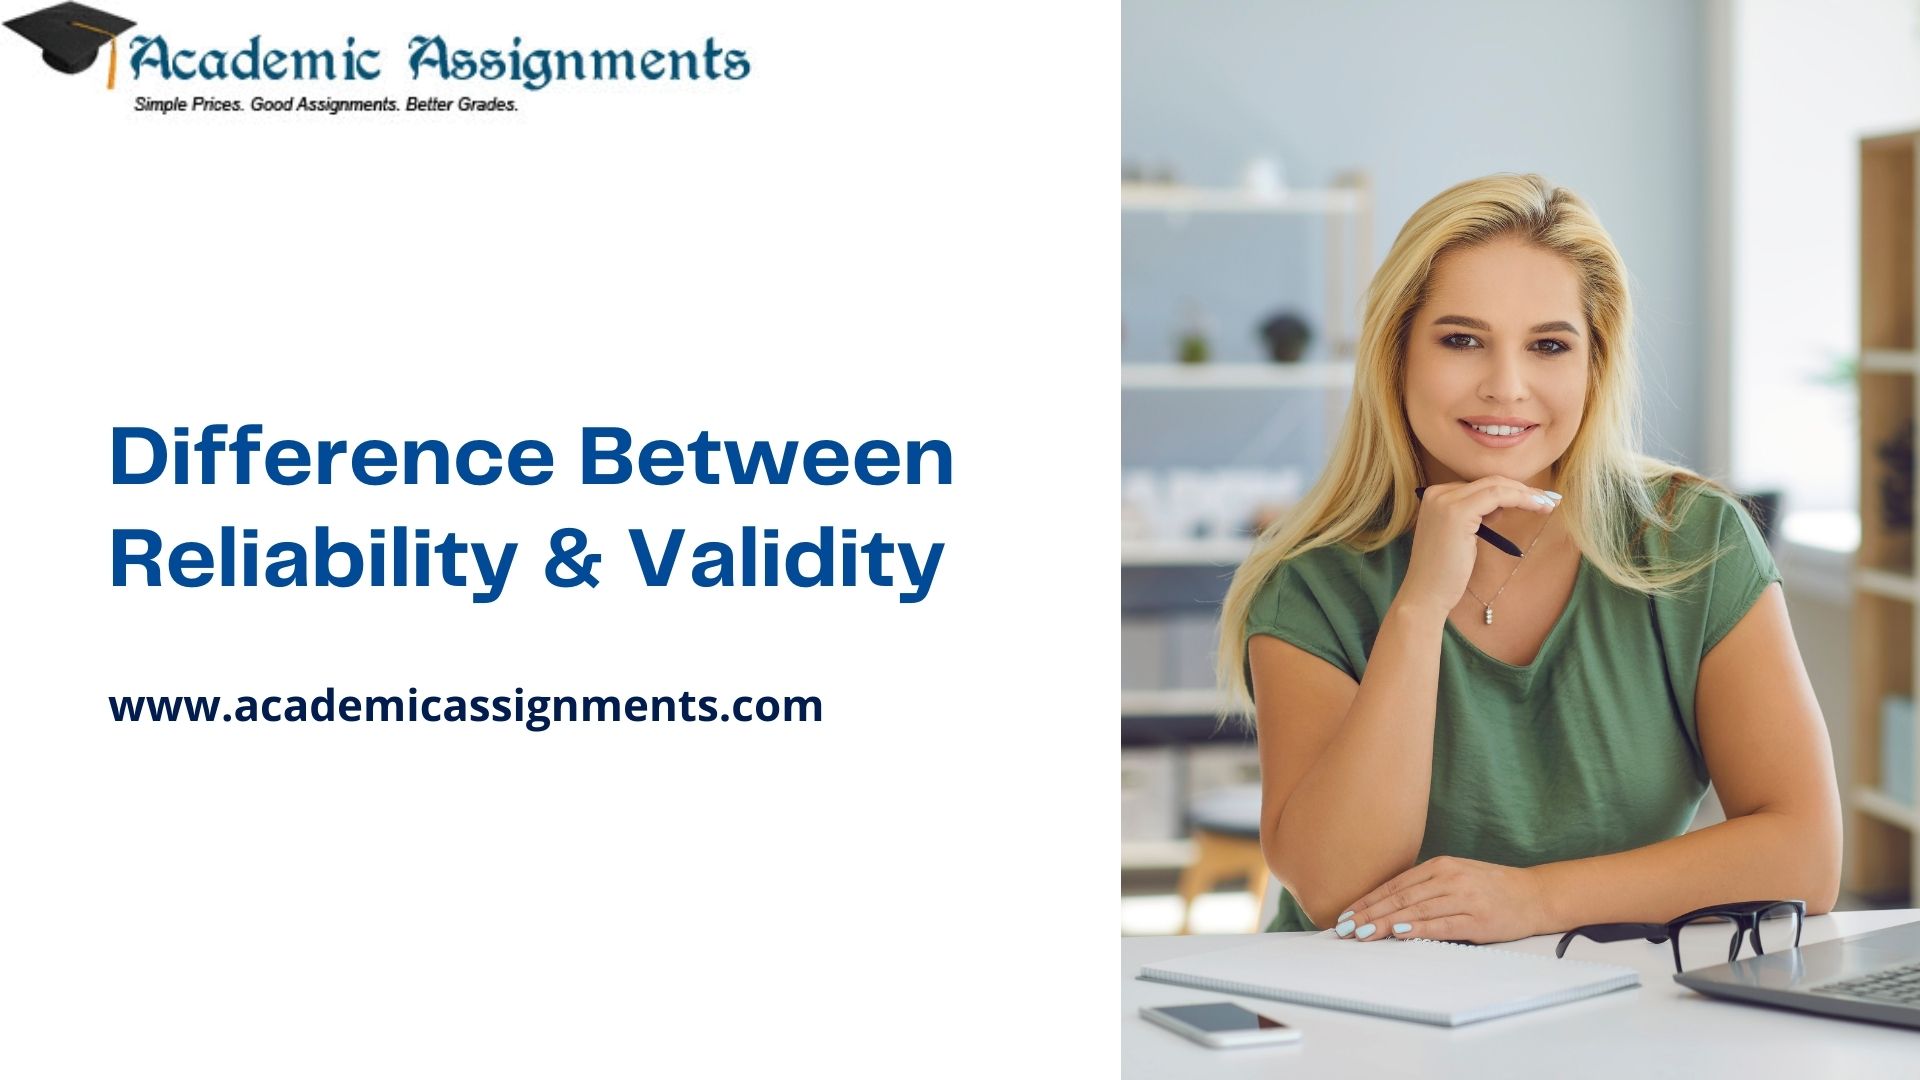 Difference Between Reliability & Validity